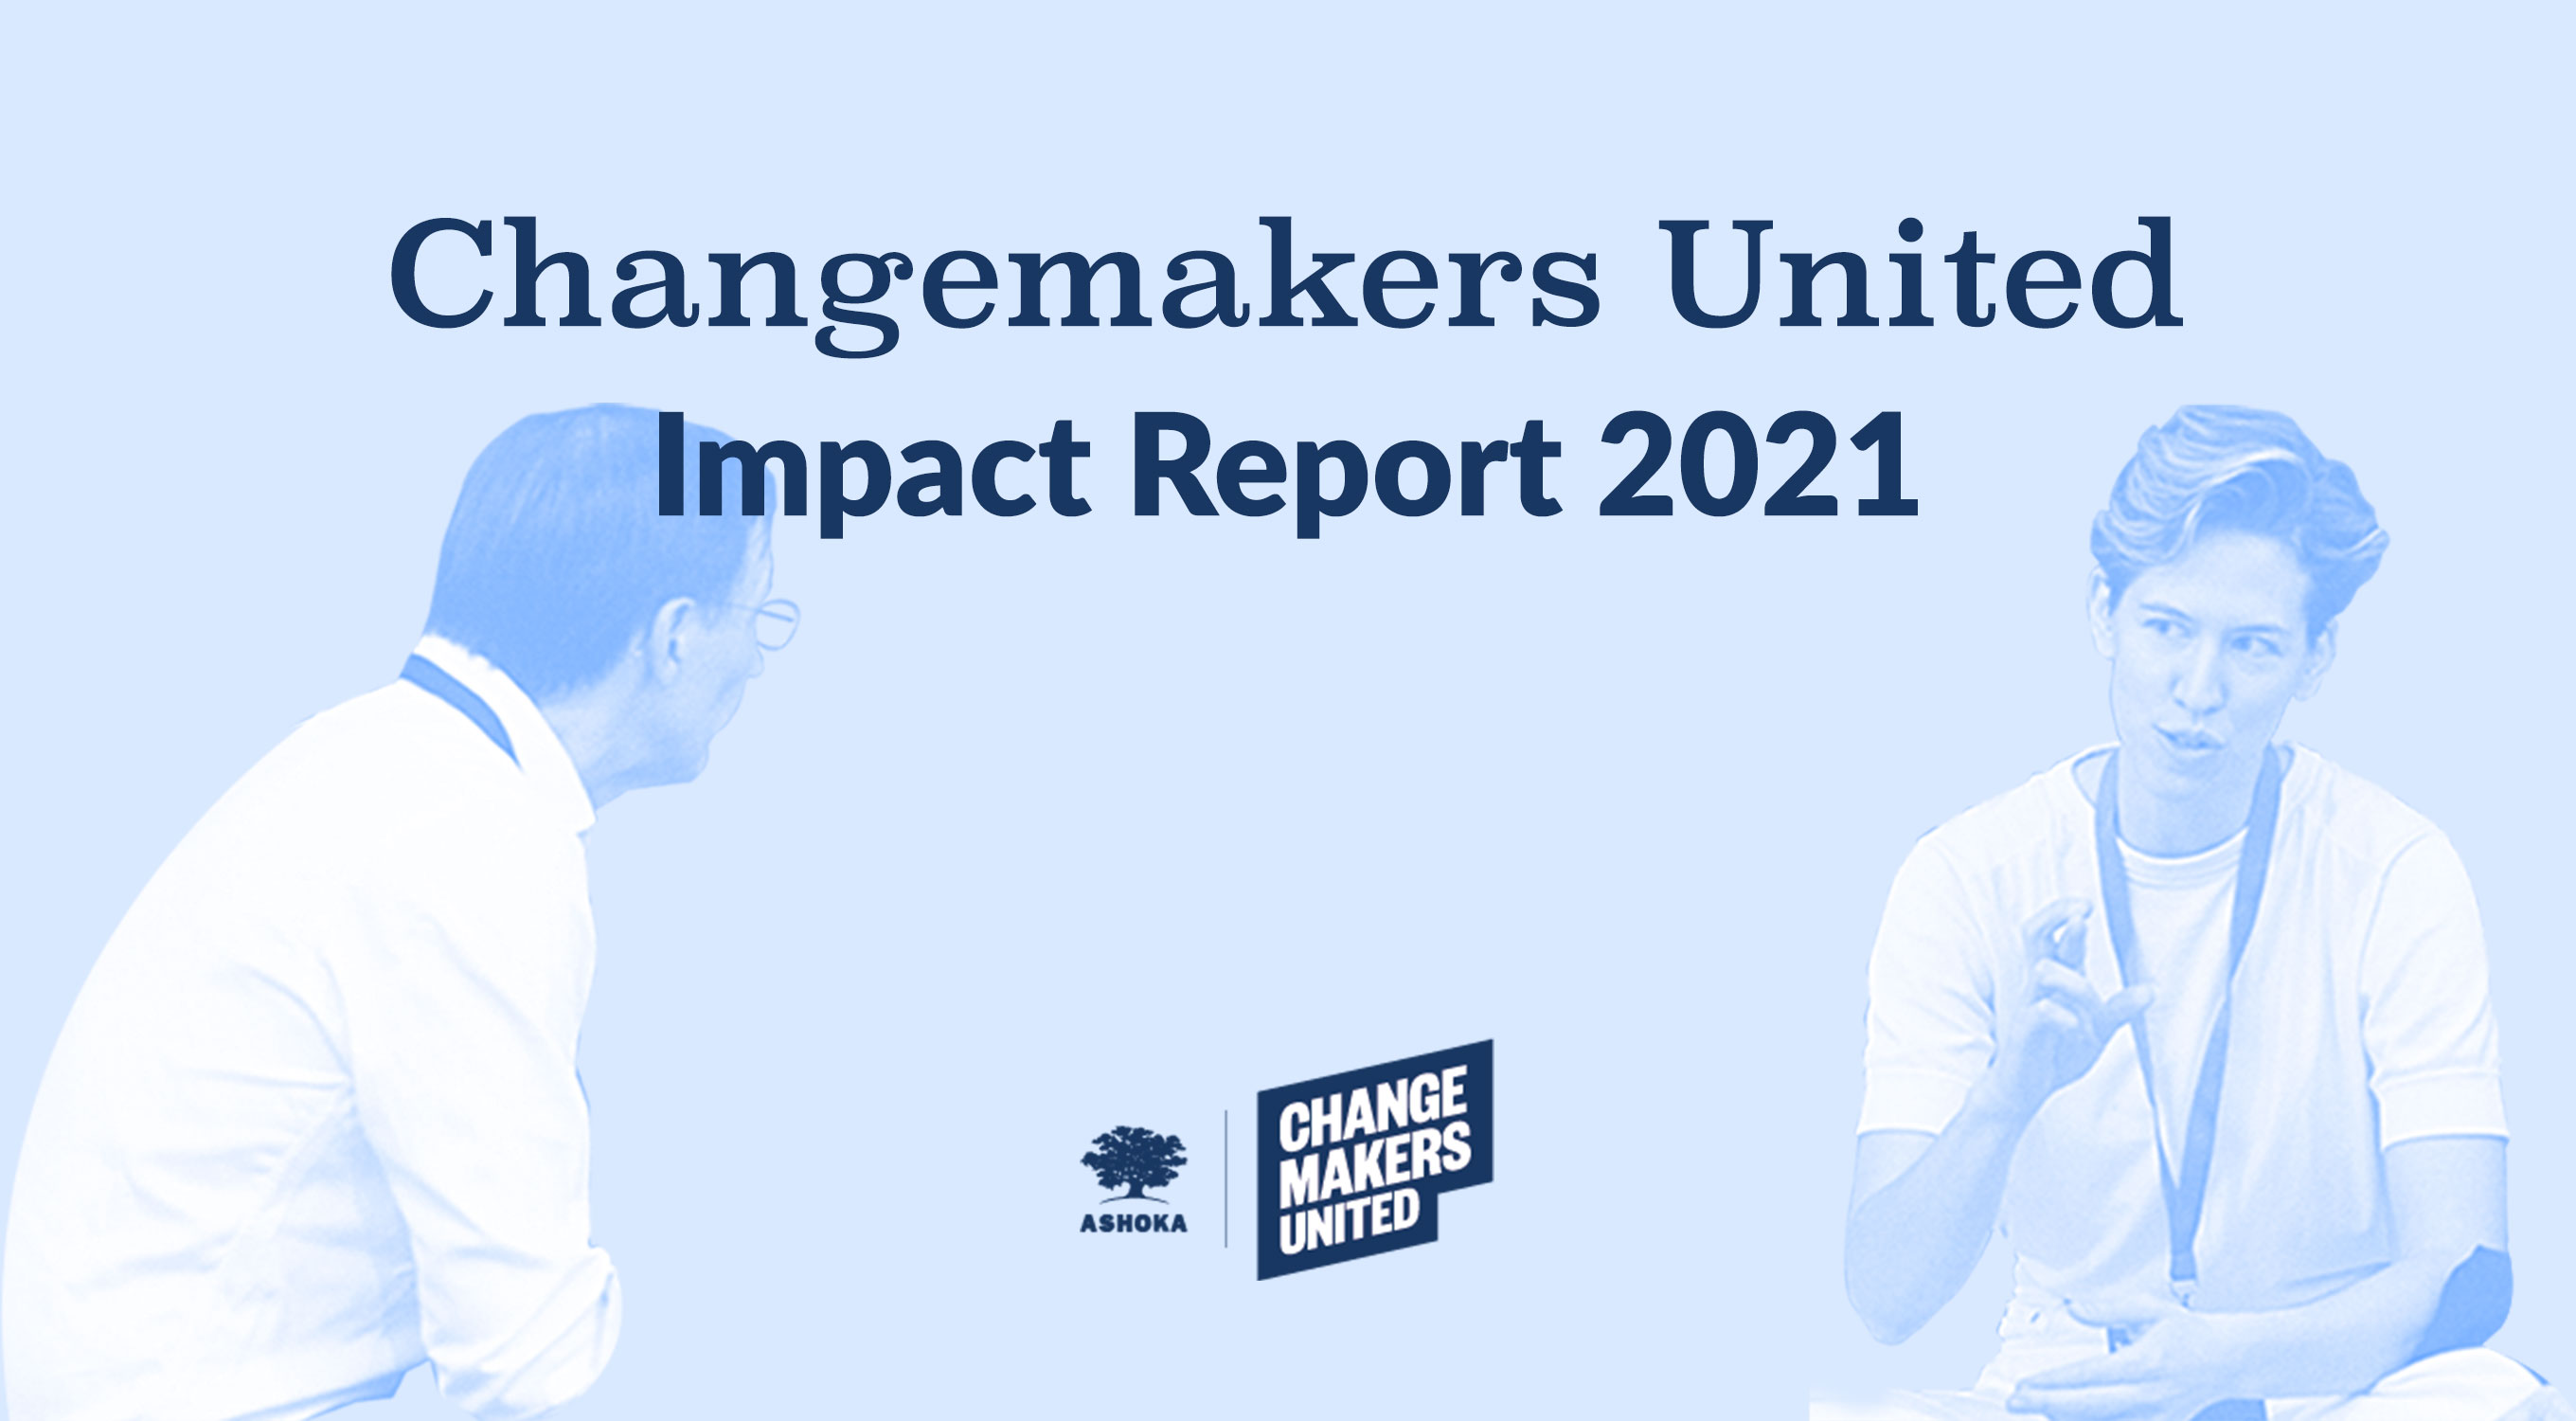 A blue, monochromatic image of a person expressively explaining a topic to a man. The text at the center of the image reads "Changemakers United Impact Report 2021” with the Ashoka and Changemakers United logos below.